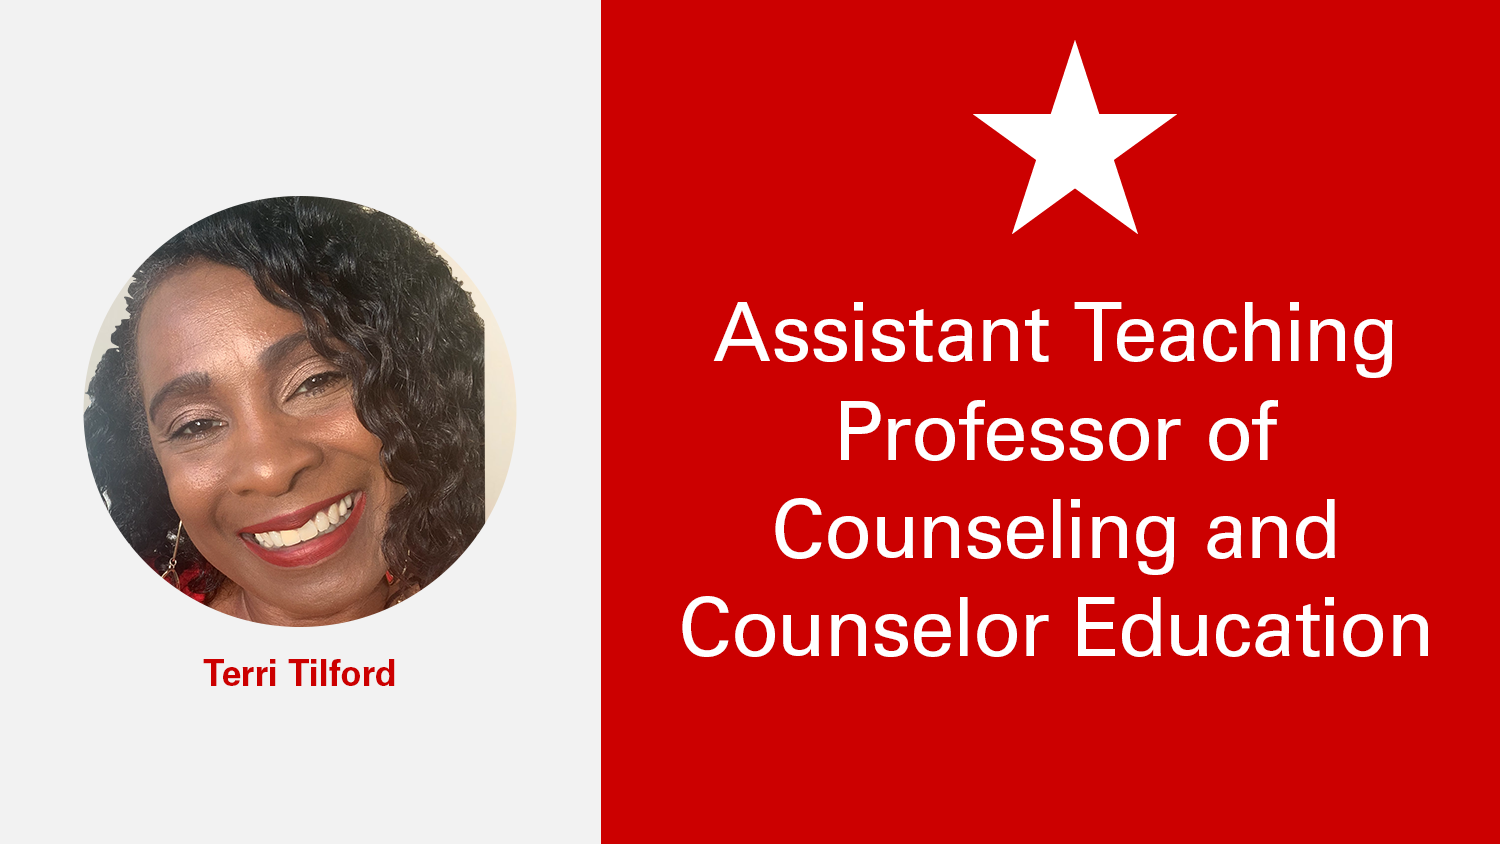 NC State College of Education Assistant Teaching Professor Terri Tilford